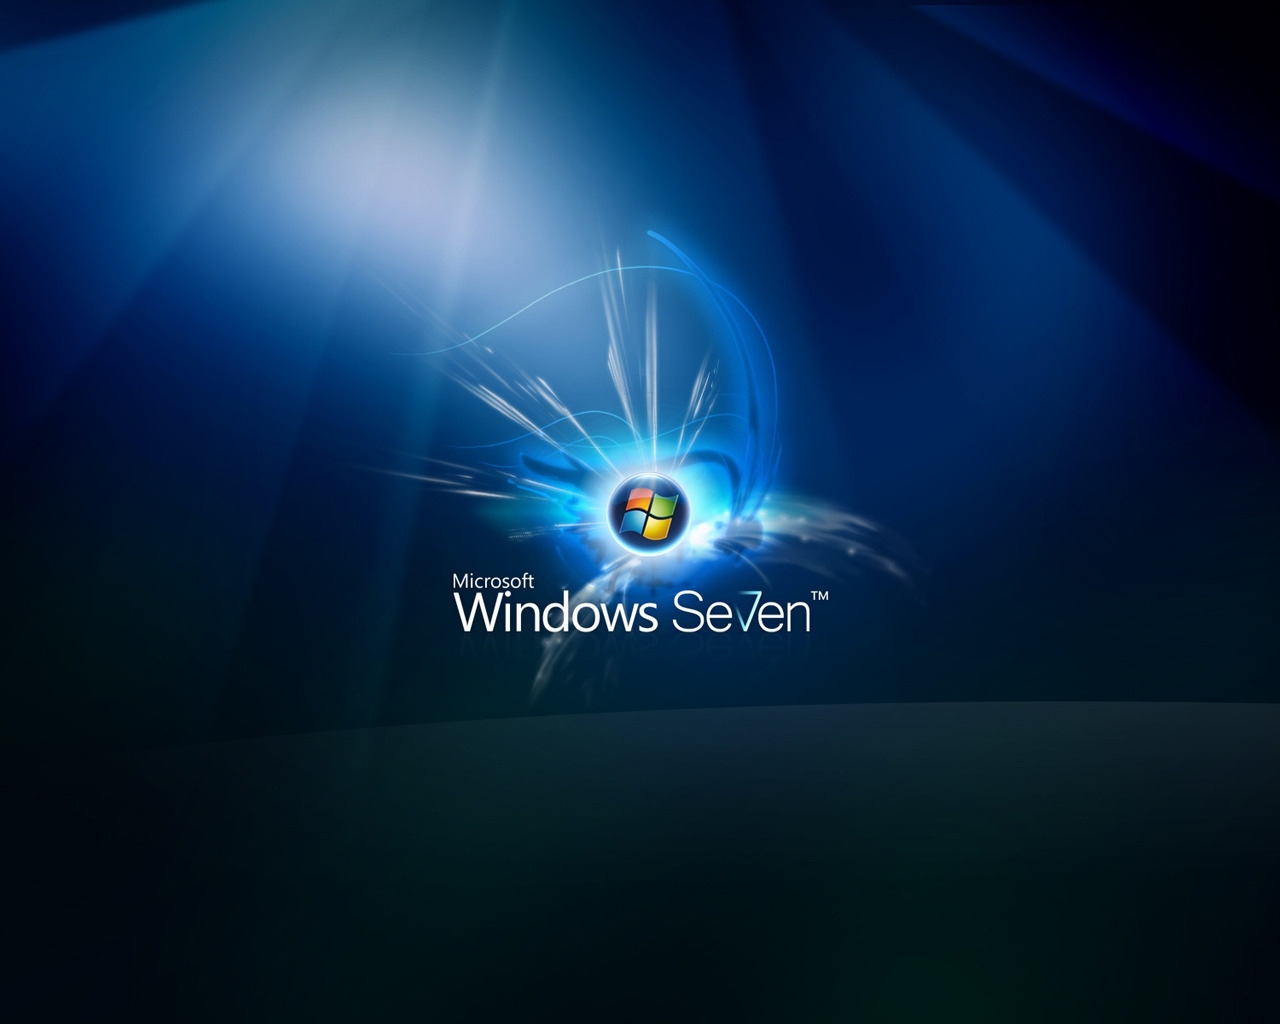 Great Windows Seven for 1280 x 1024 resolution